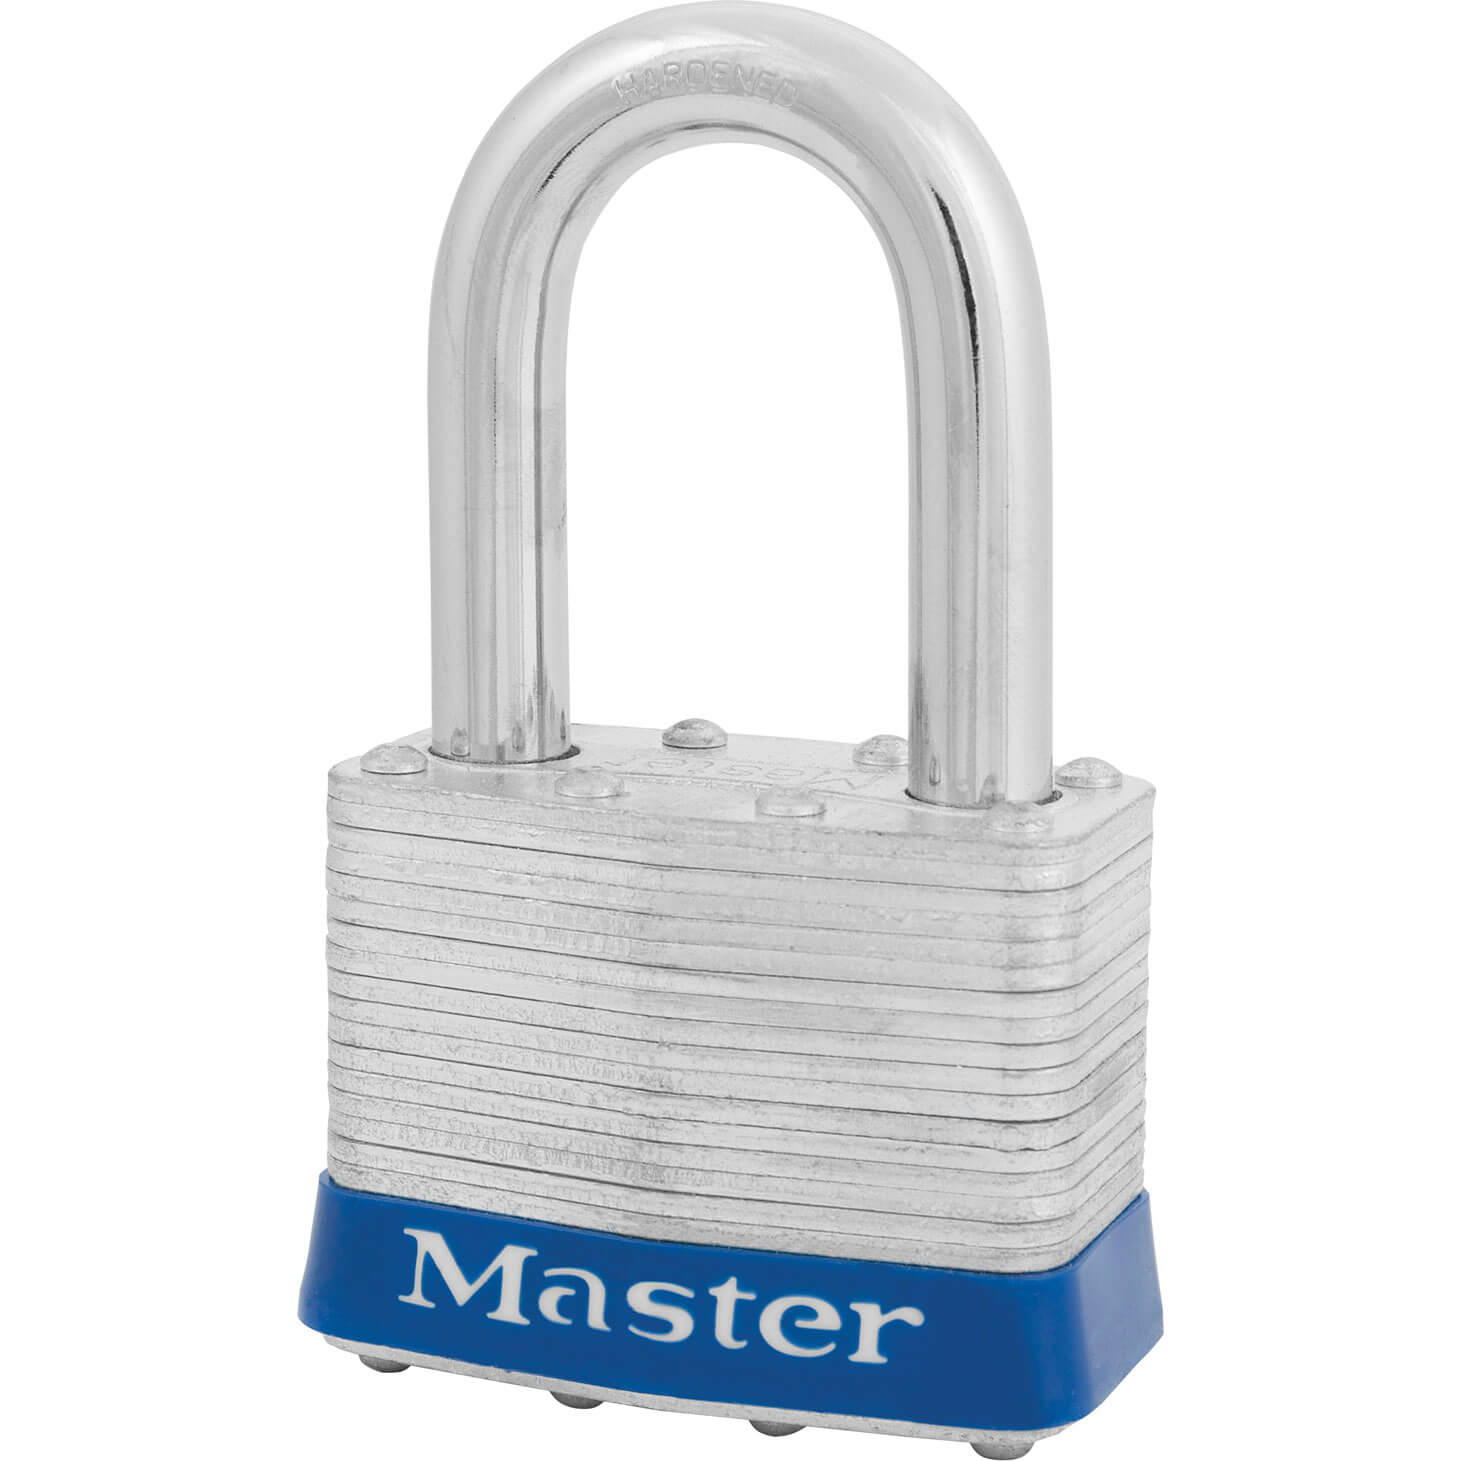 Click to view product details and reviews for Masterlock Laminated Steel Padlock Keyed Alike 51mm Long.